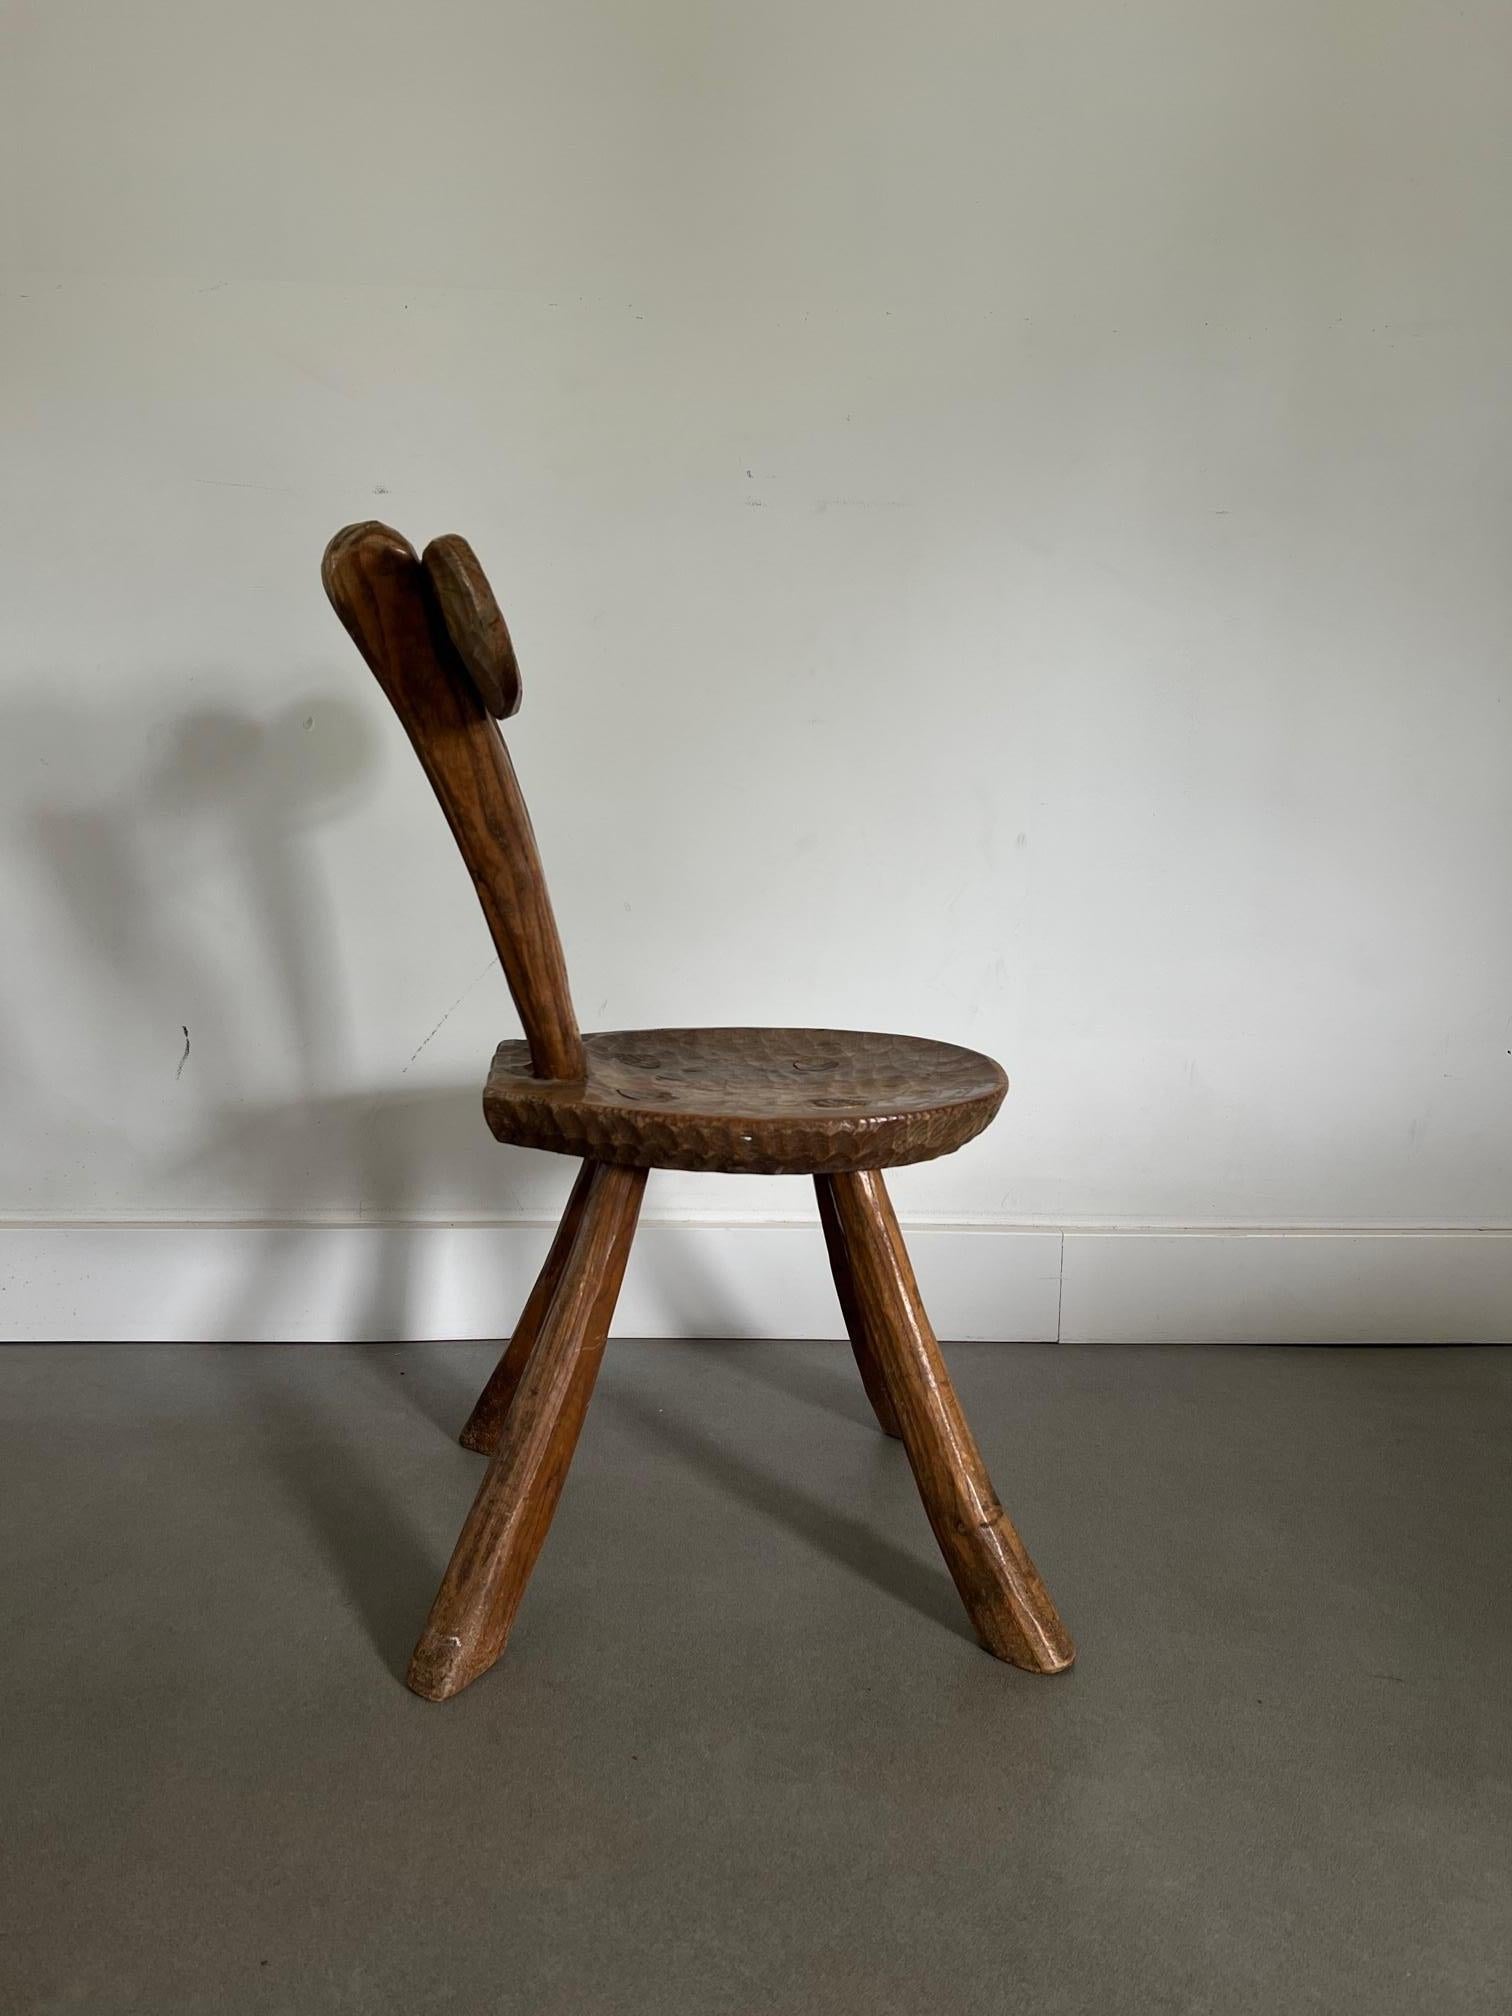 Brutalist carved oak chairs from France are a type of furniture that originated in the mid-20th century. They are known for their bold, sculptural forms and use of rough, unpolished materials such as raw wood and metal.

The term 